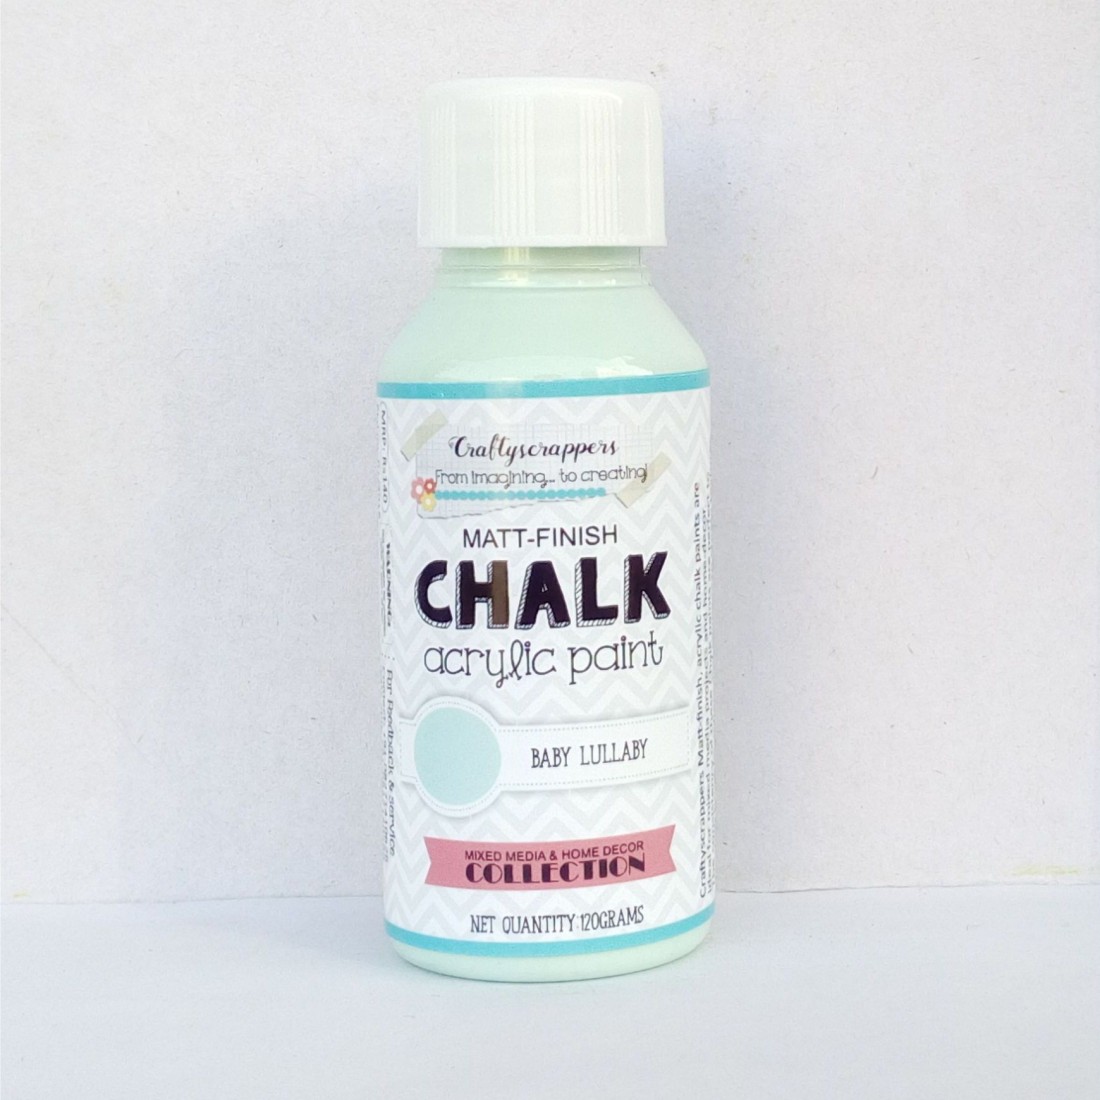 Craftyscrappers Chalkpaint- BABY LULABY